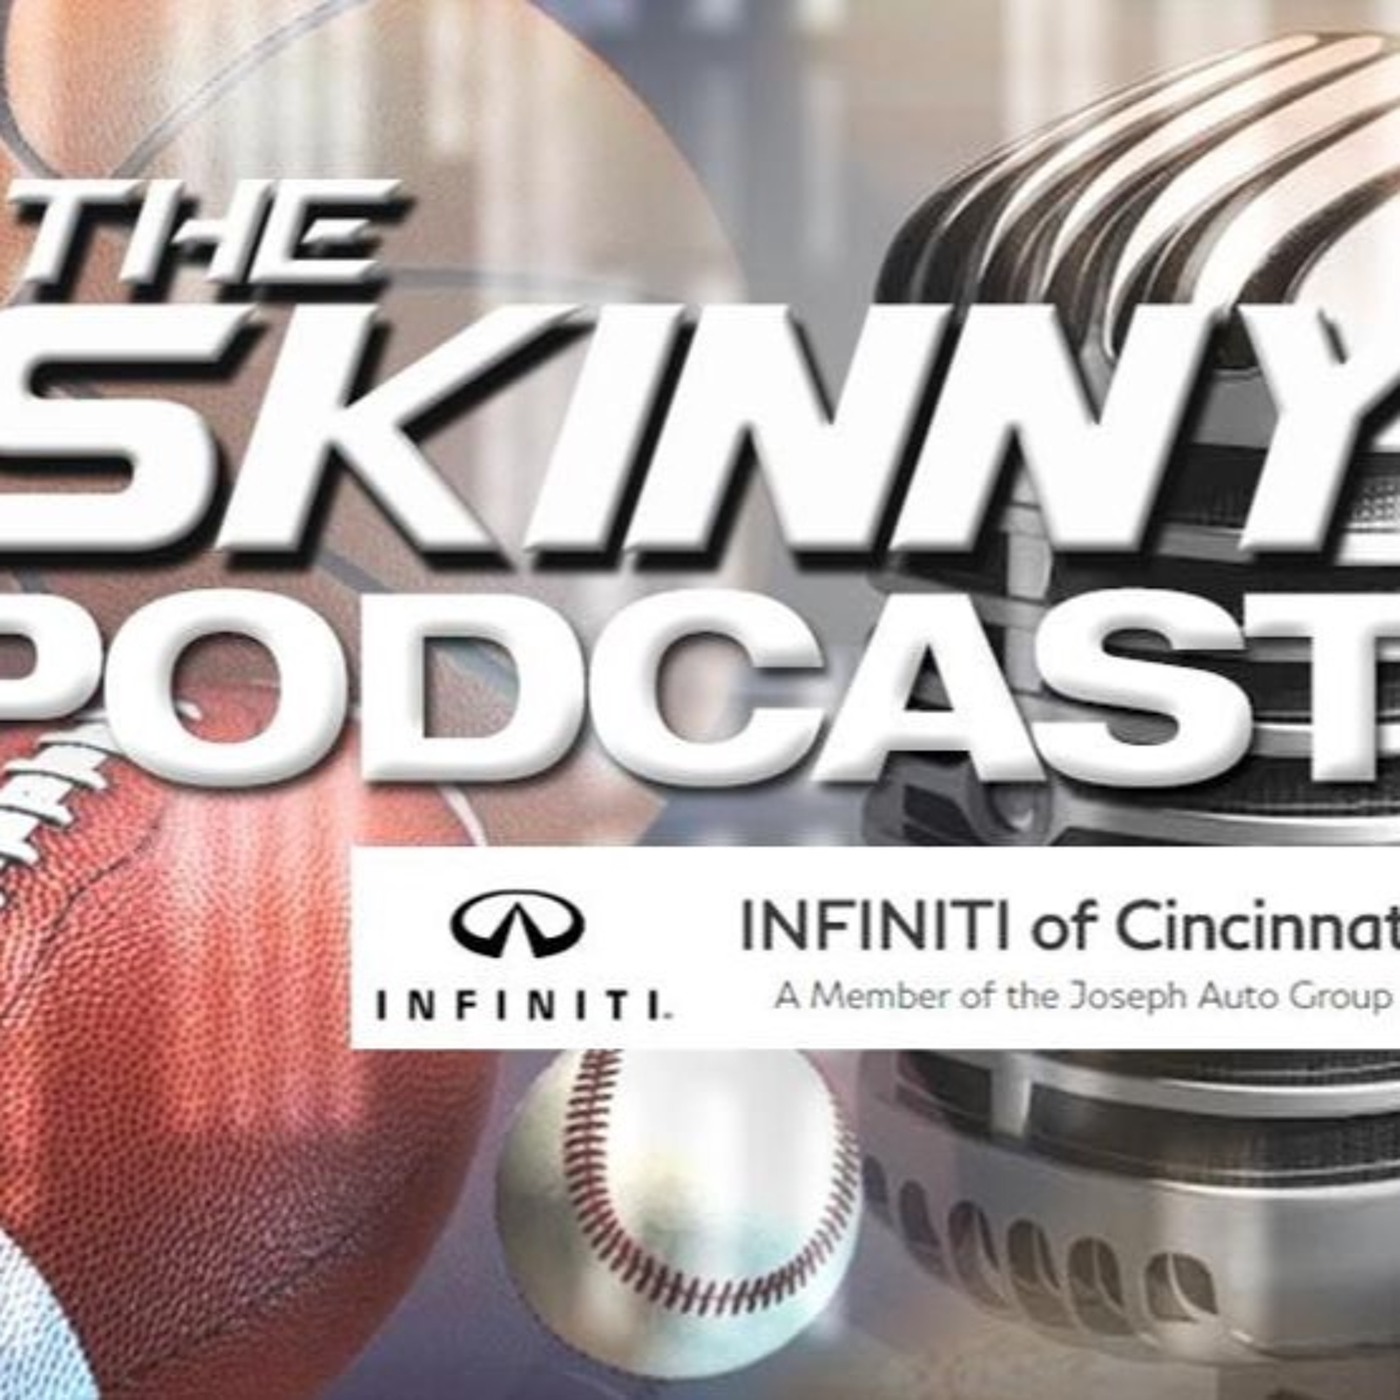 The Skinny Podcast: Talking sports with Rick Broering (11/22/18)